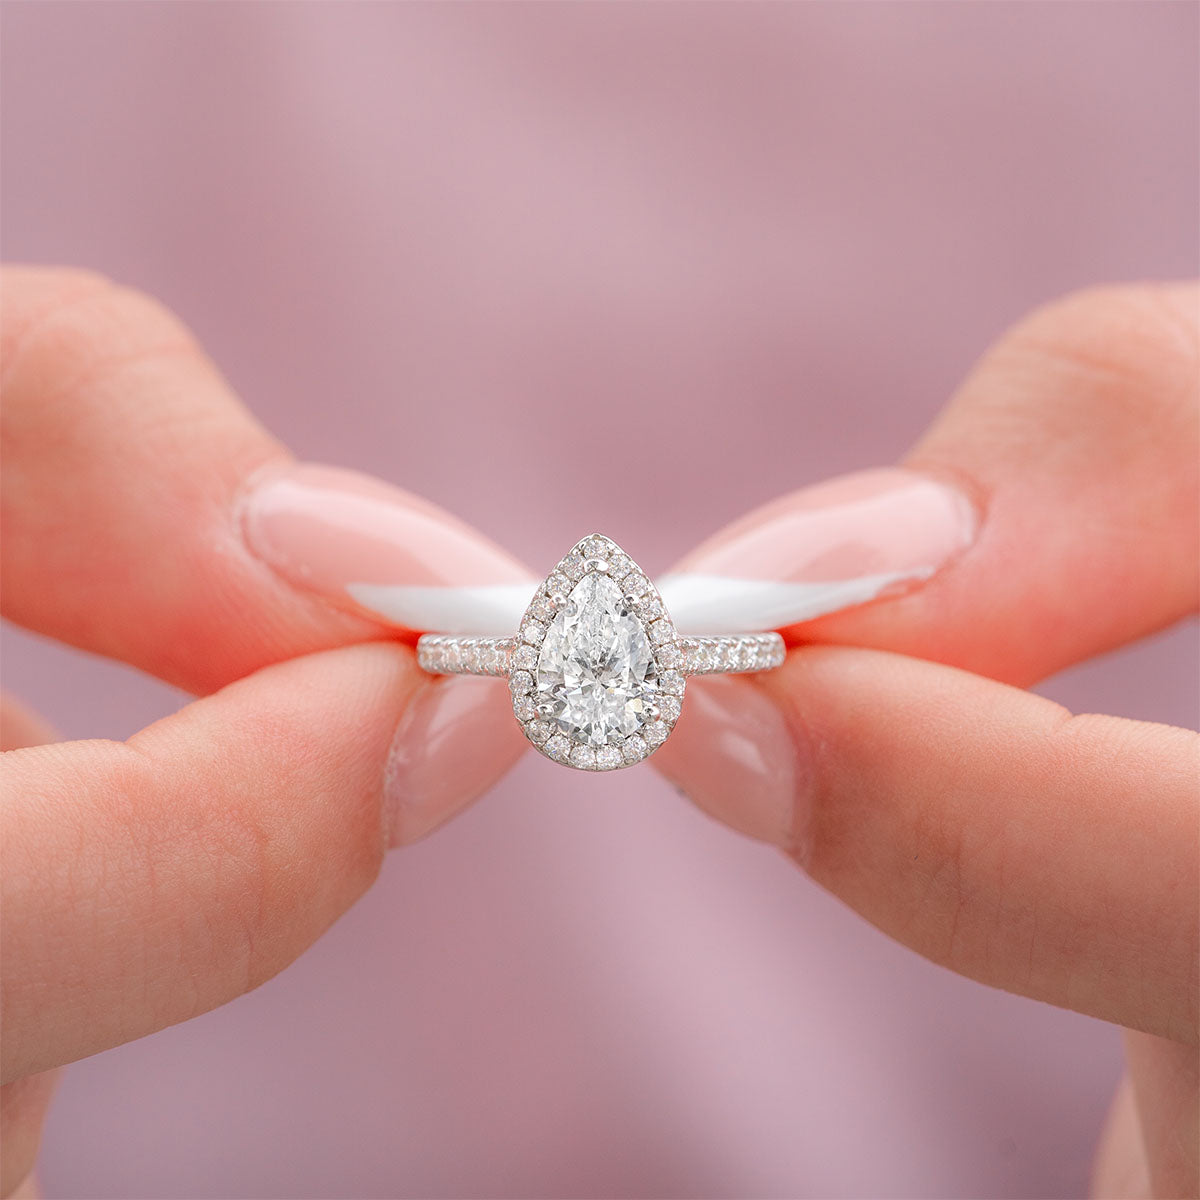 Woman holding silver pear engagement ring